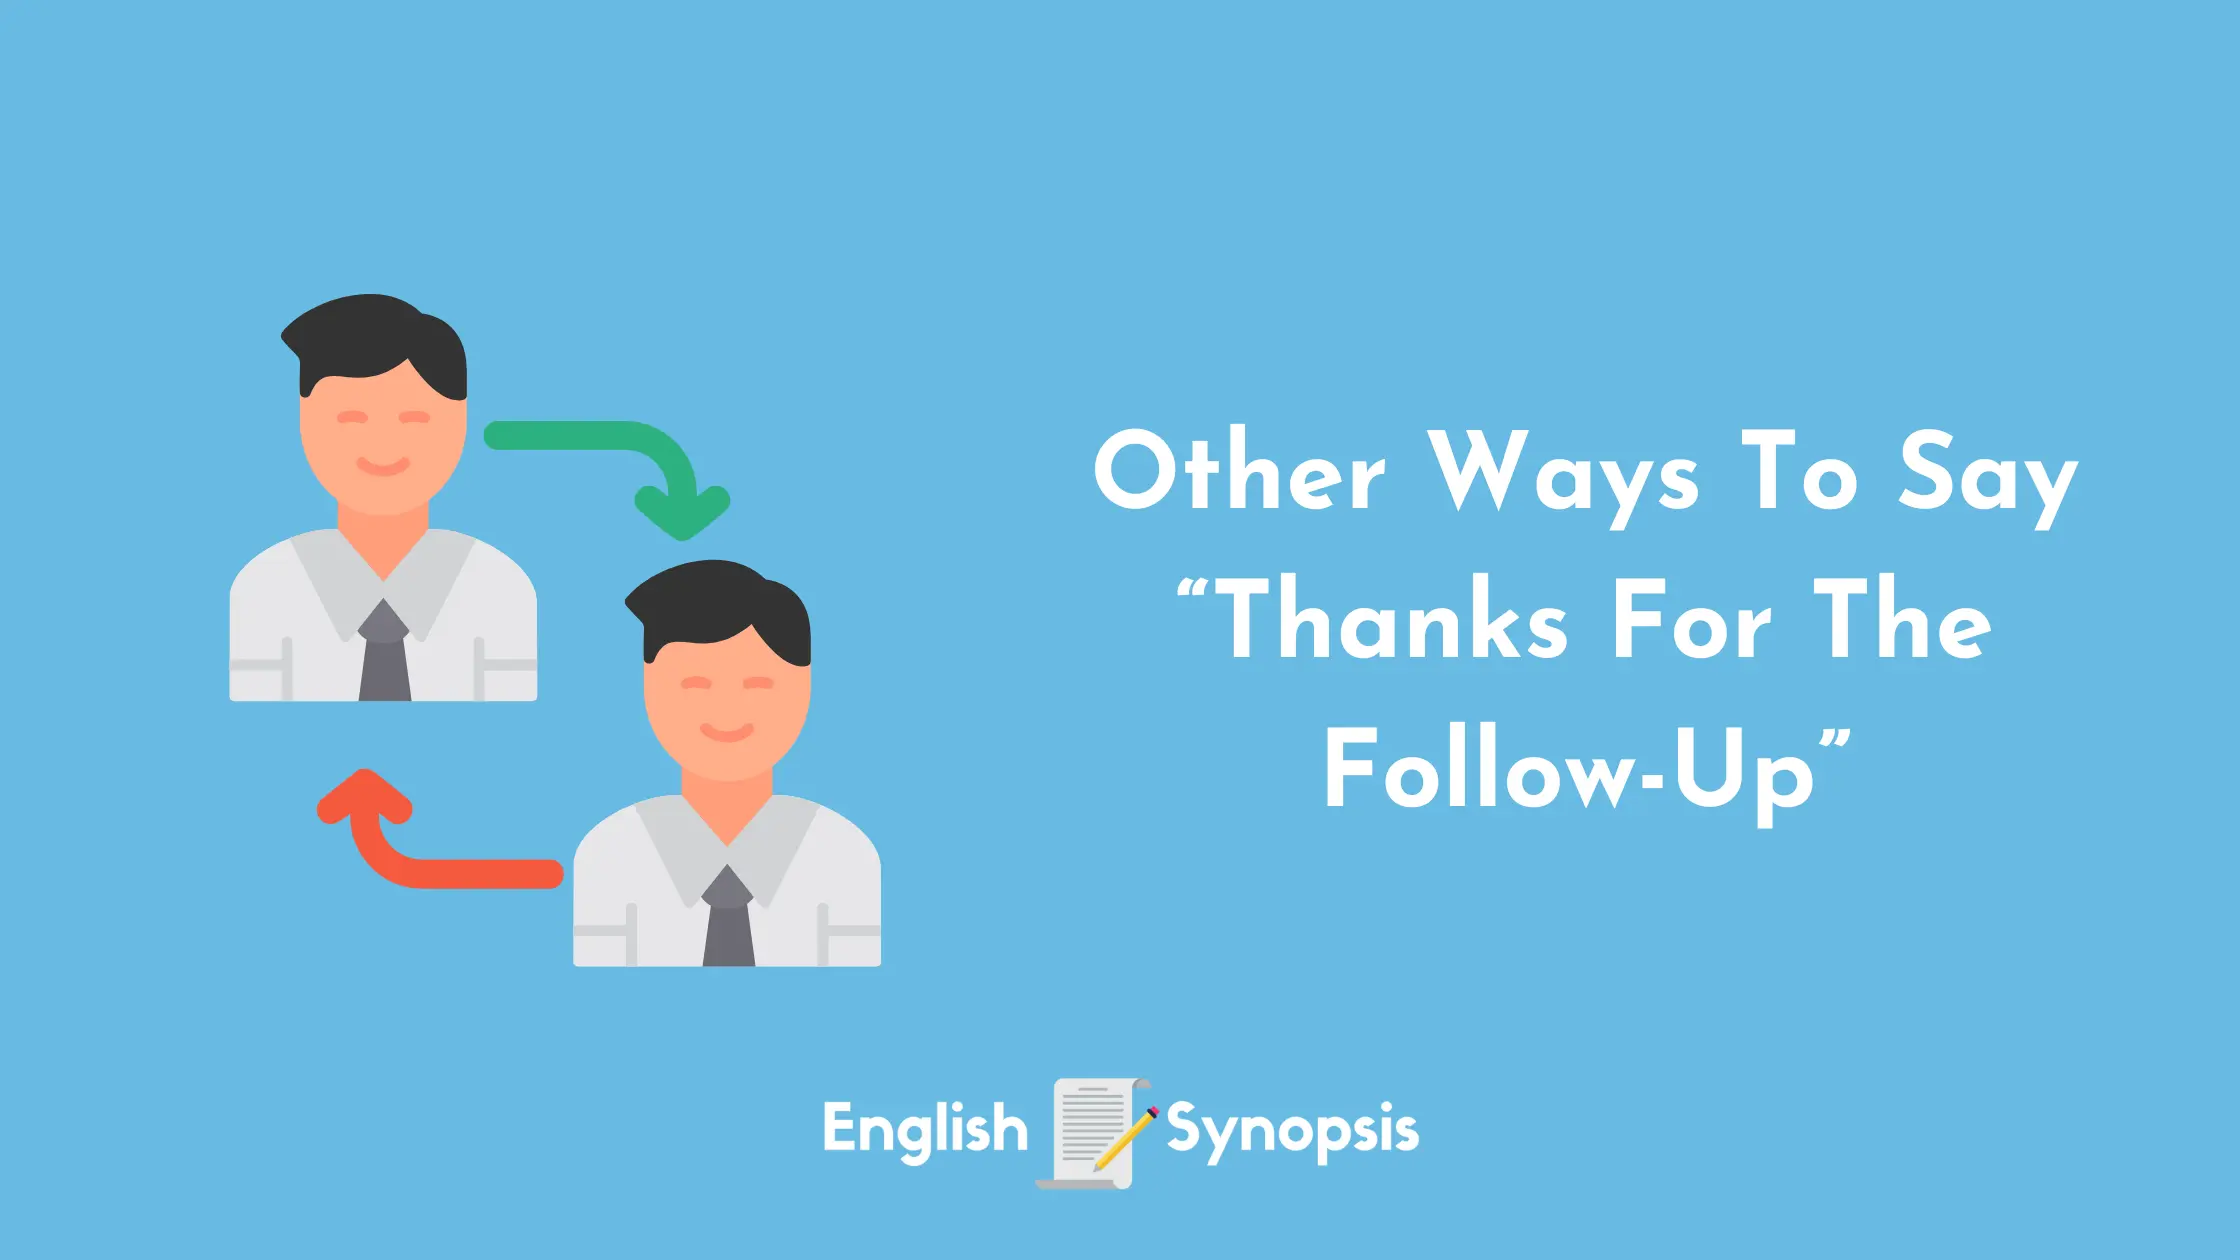 Other Ways To Say “Thanks For The Follow-Up”